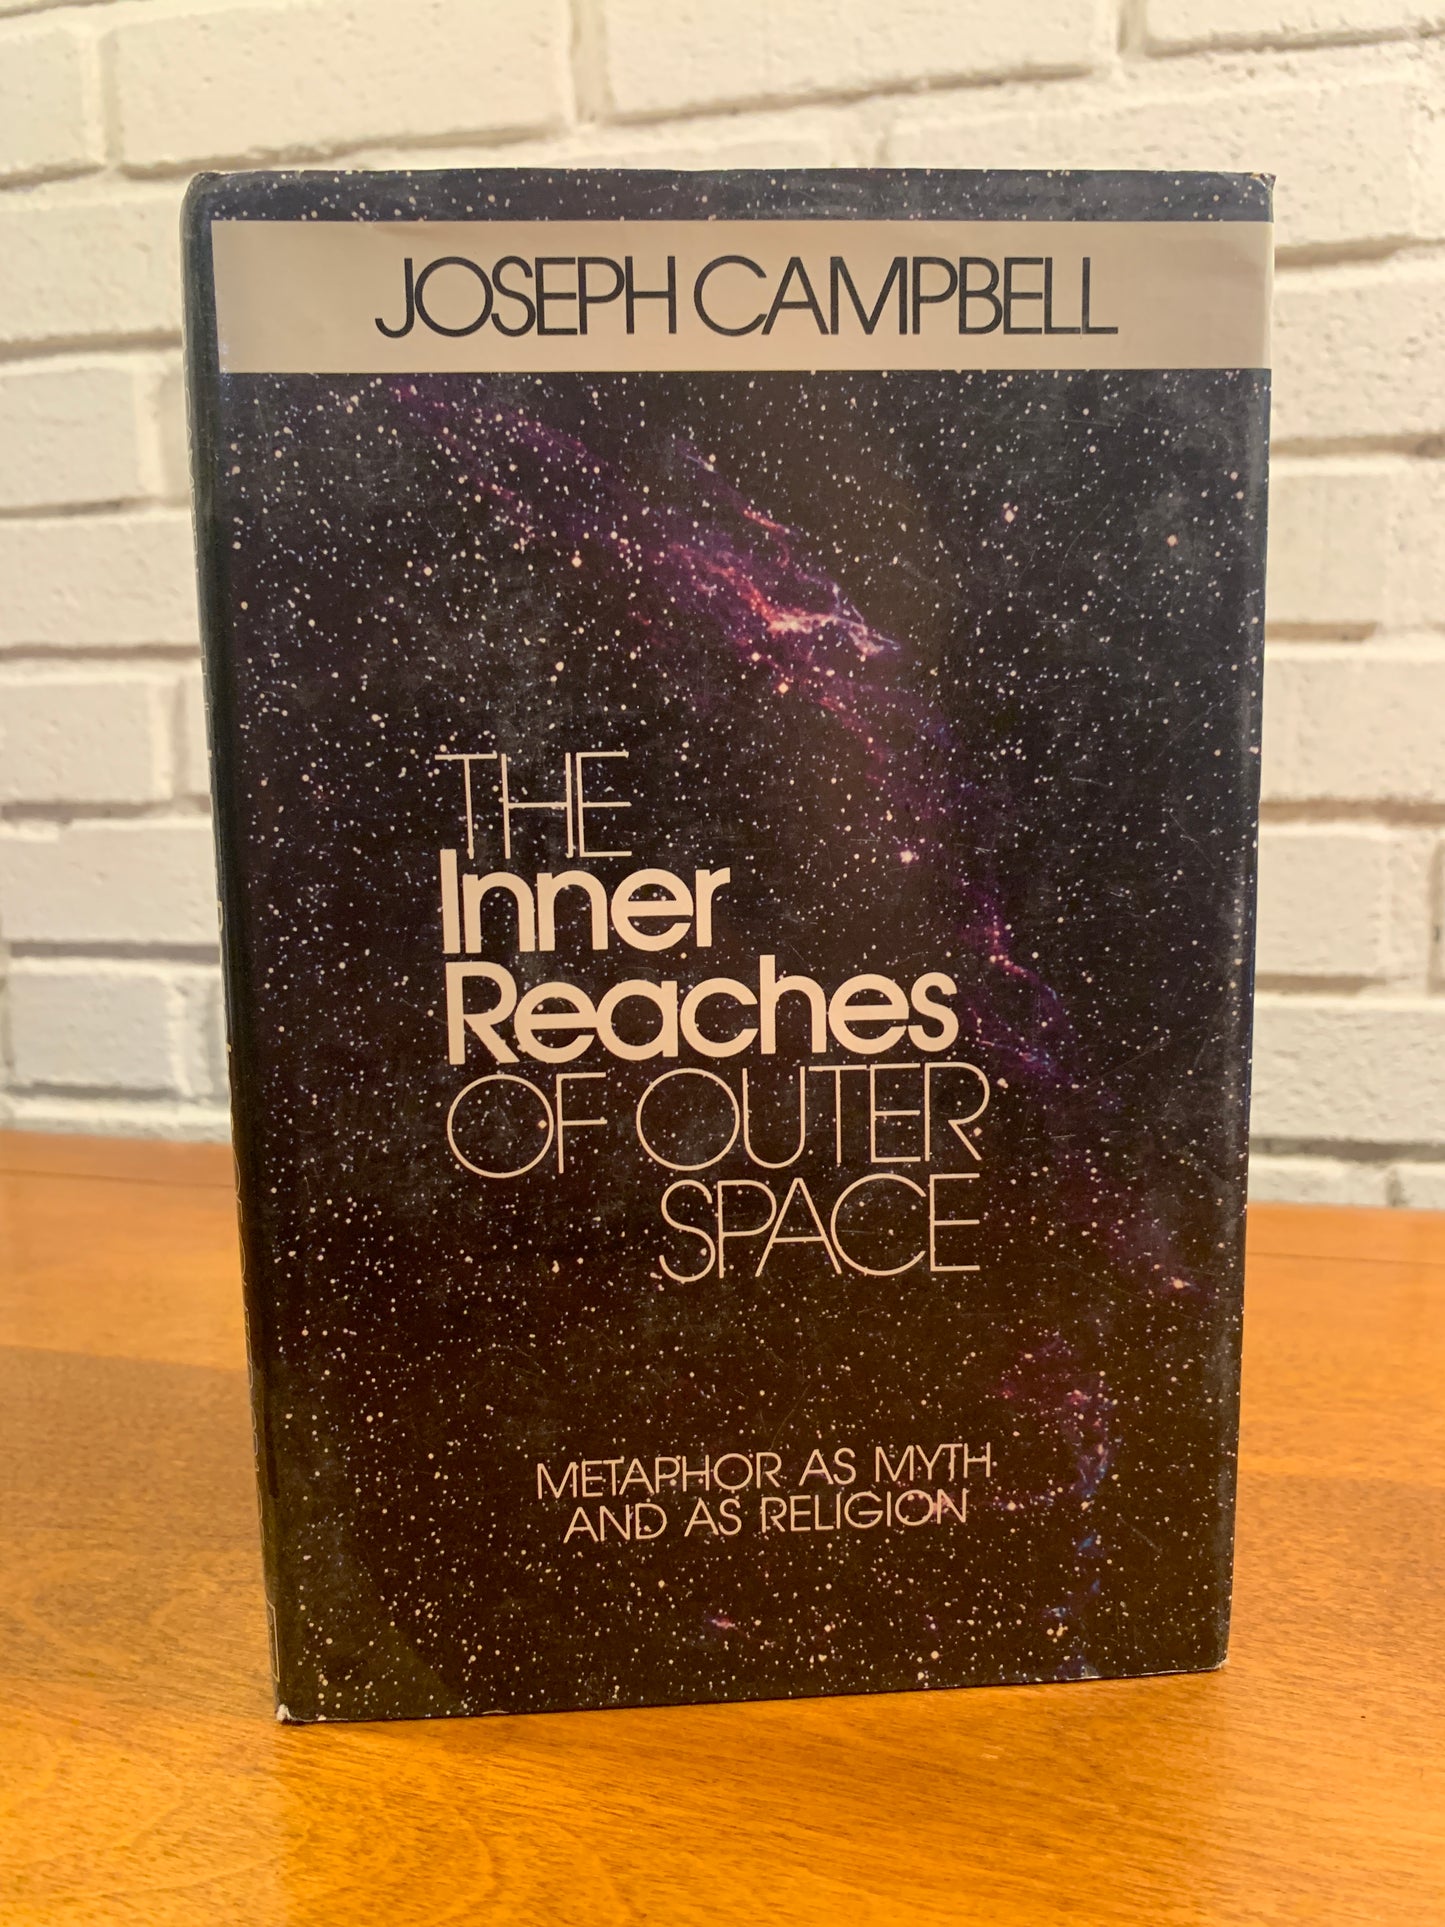 The Inner Reaches of Outer Space Metaphor As Myth & As Religion by Joseph Campbell